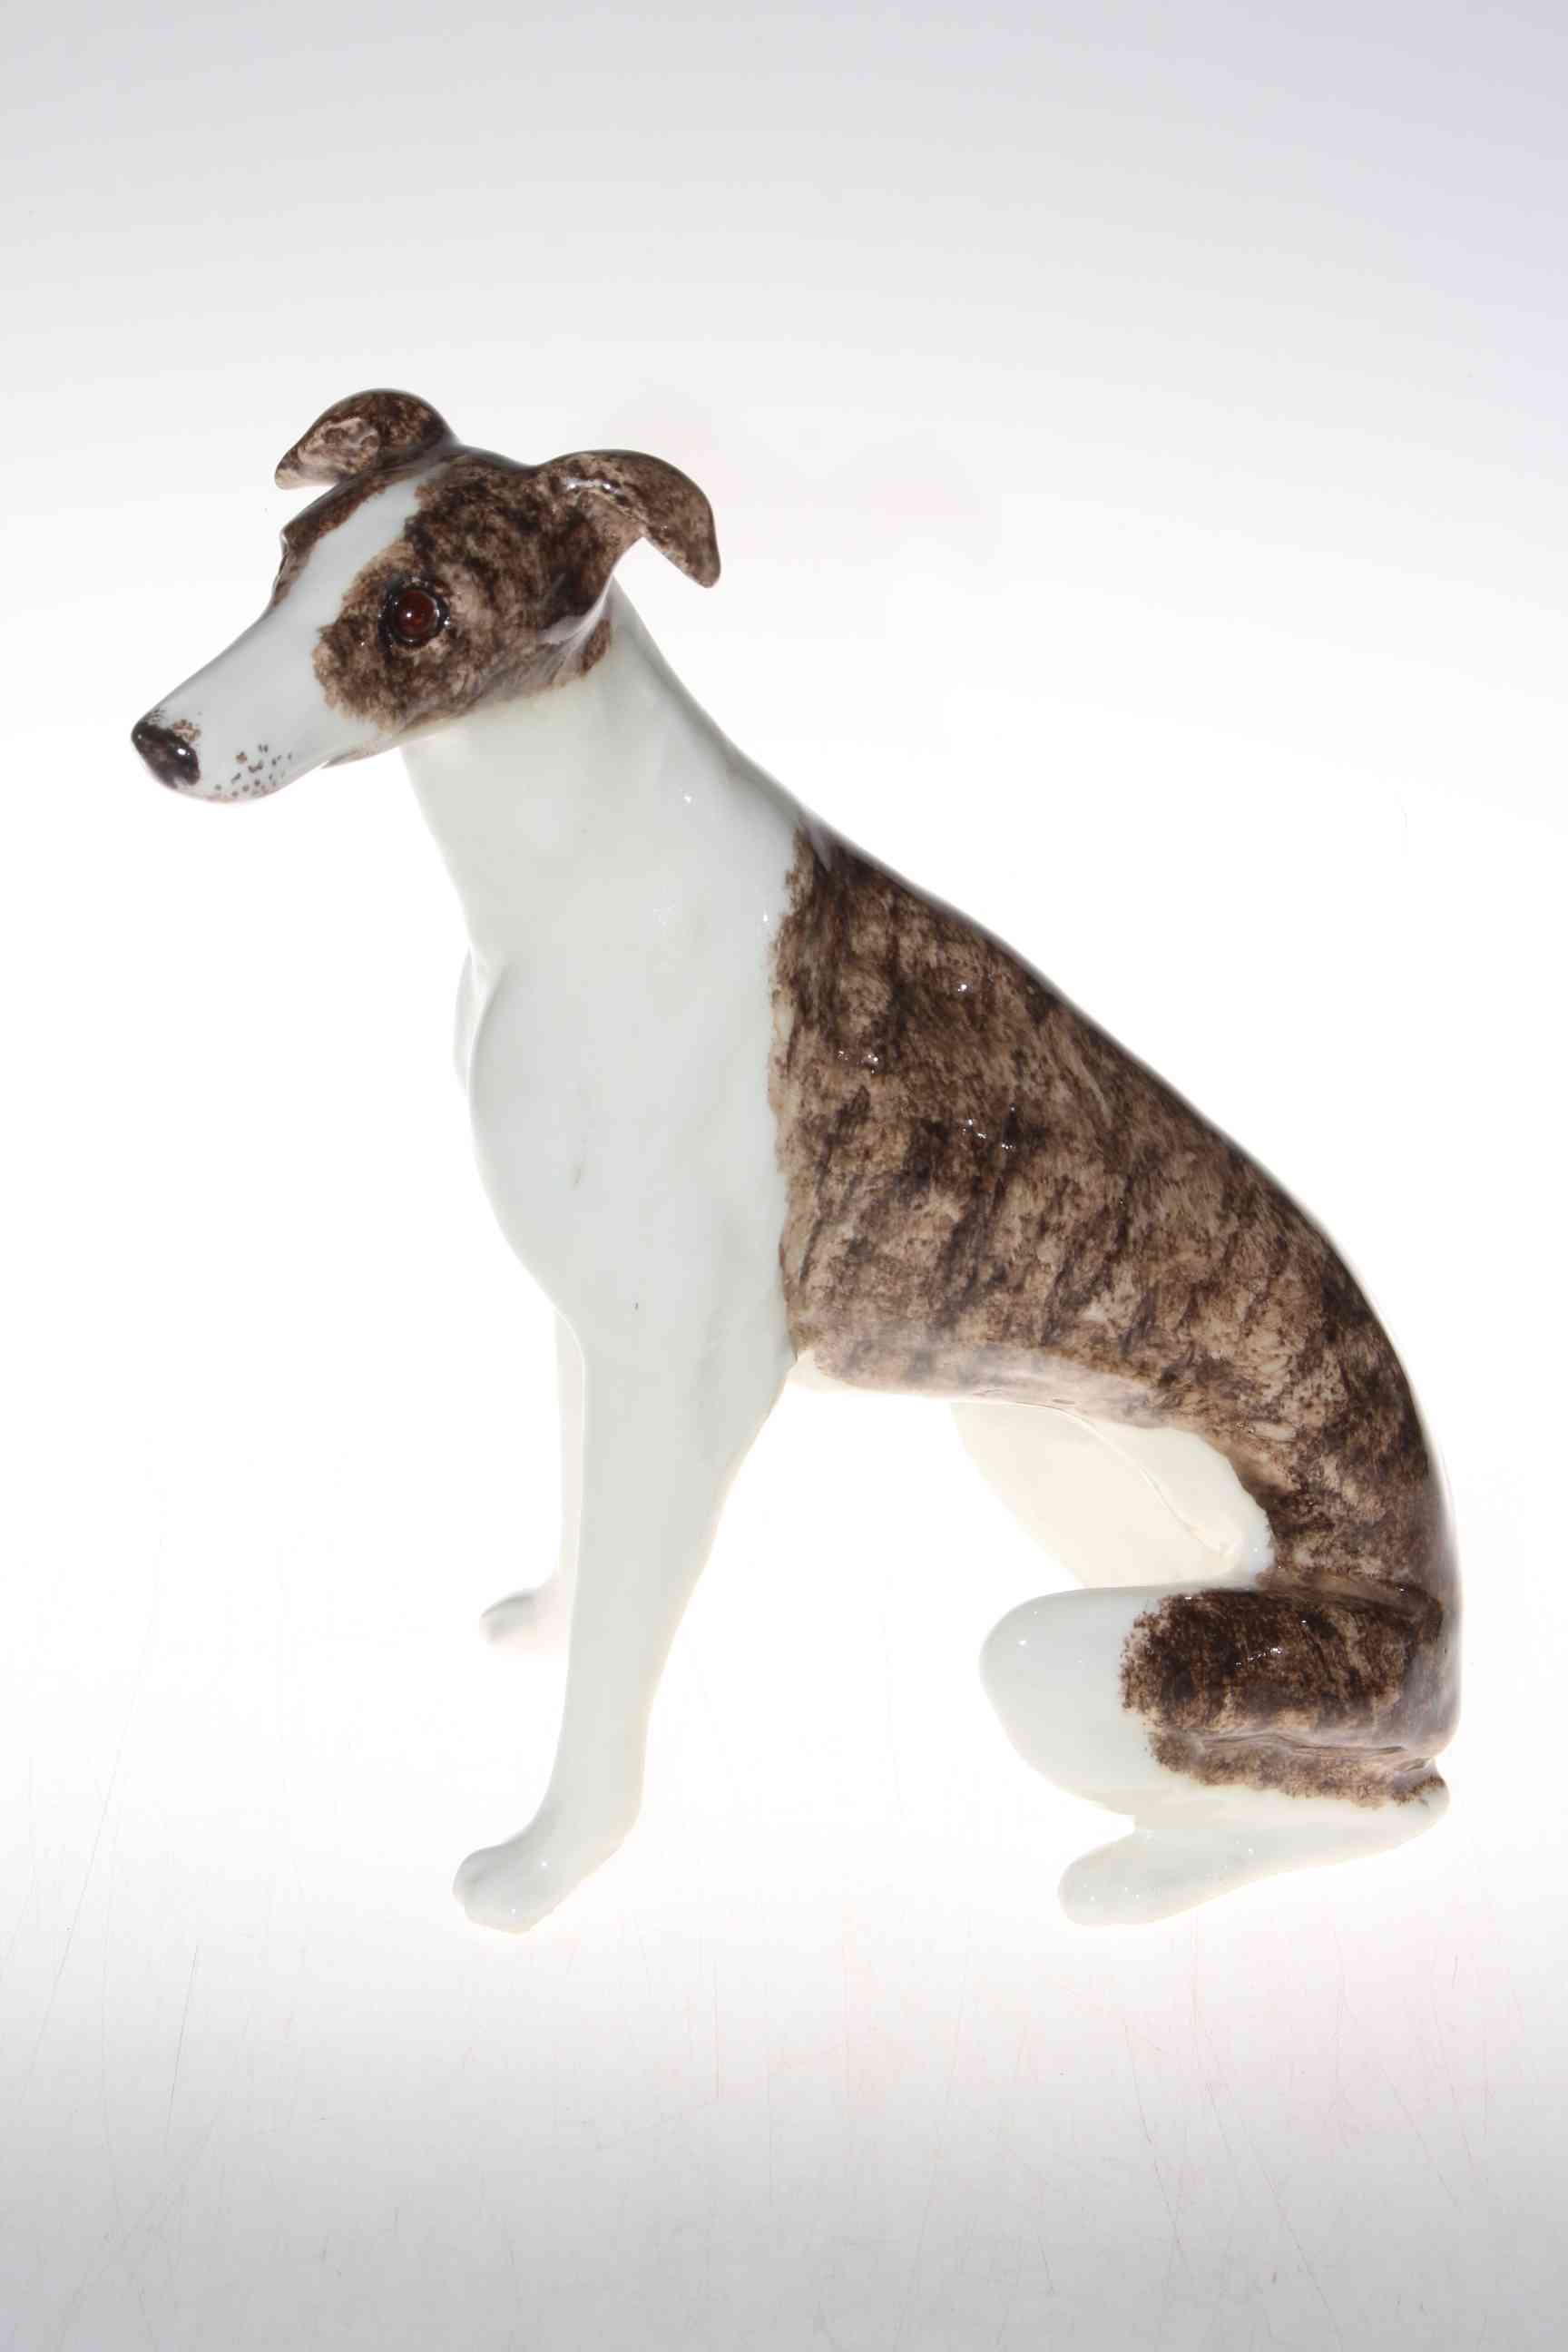 Winstanley Whippet, size 8.